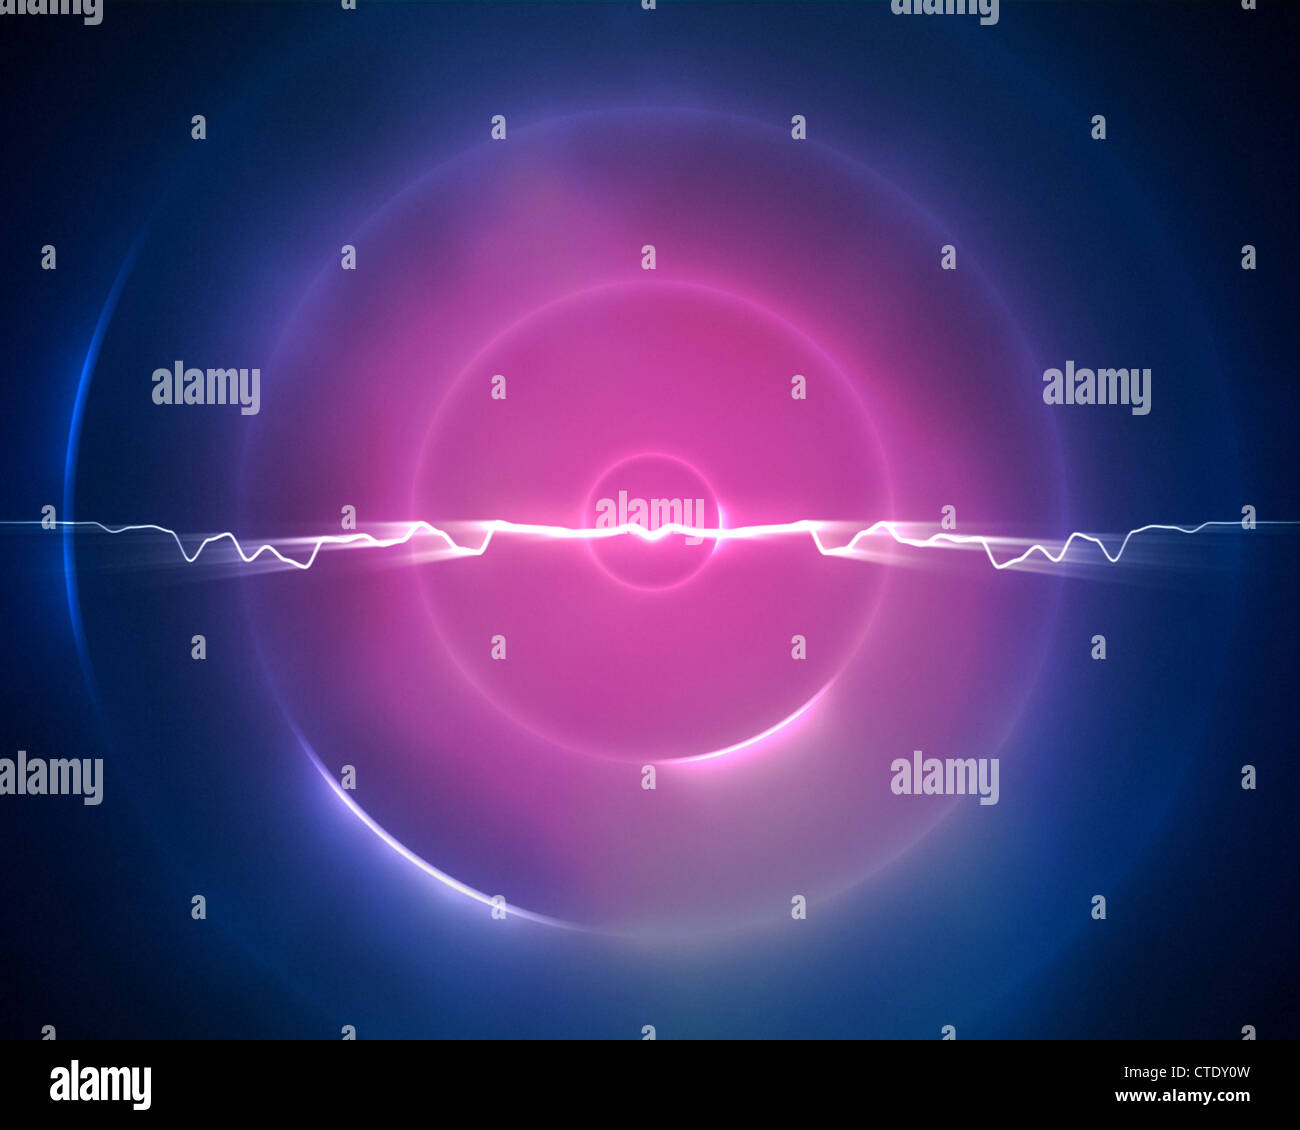 Blue and purple circle with a lightning in the middle Stock Photo